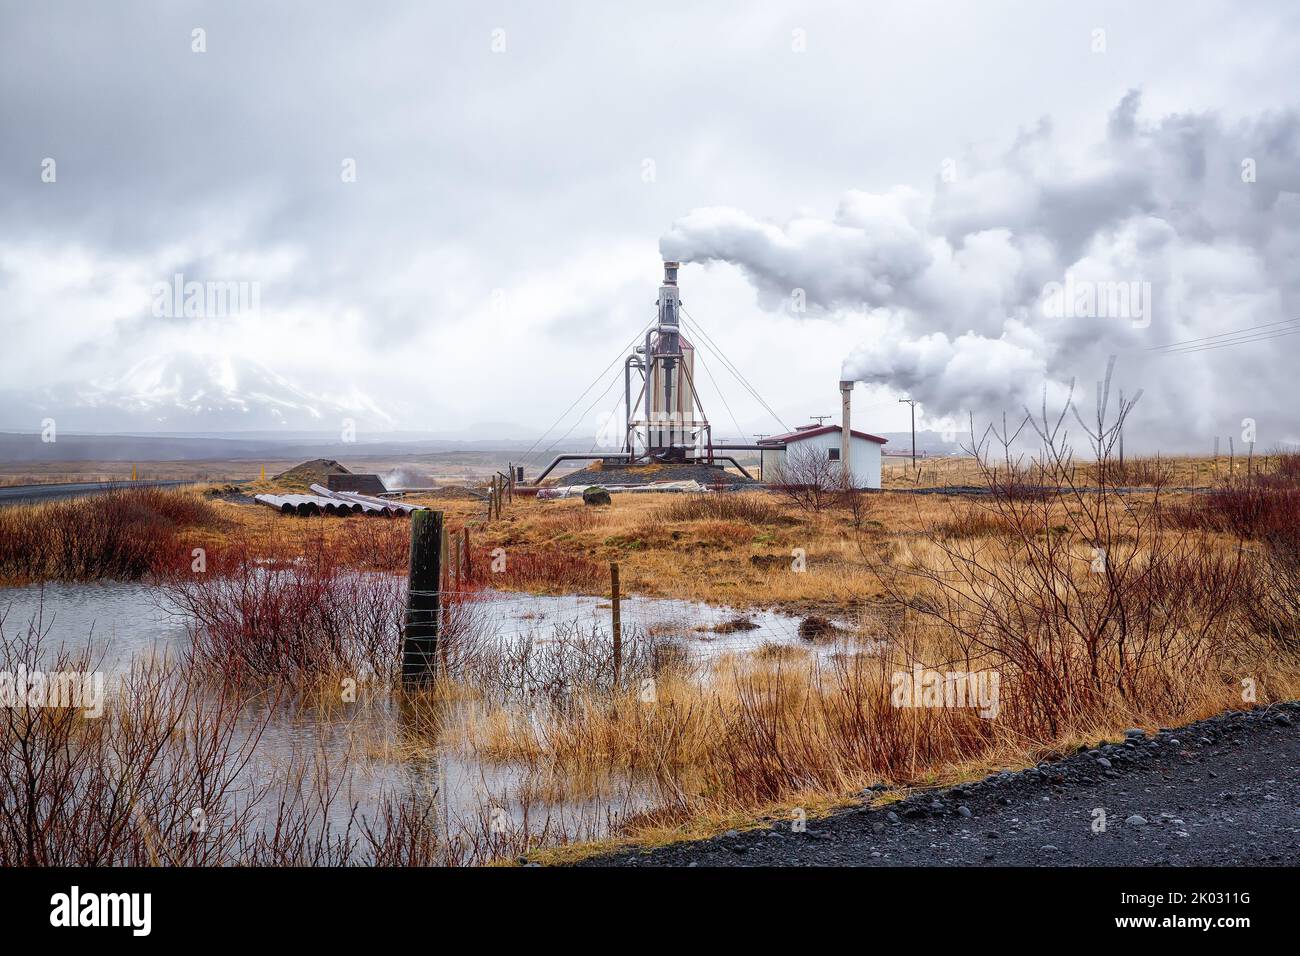 A geothermal pumping station off the road Stock Photo